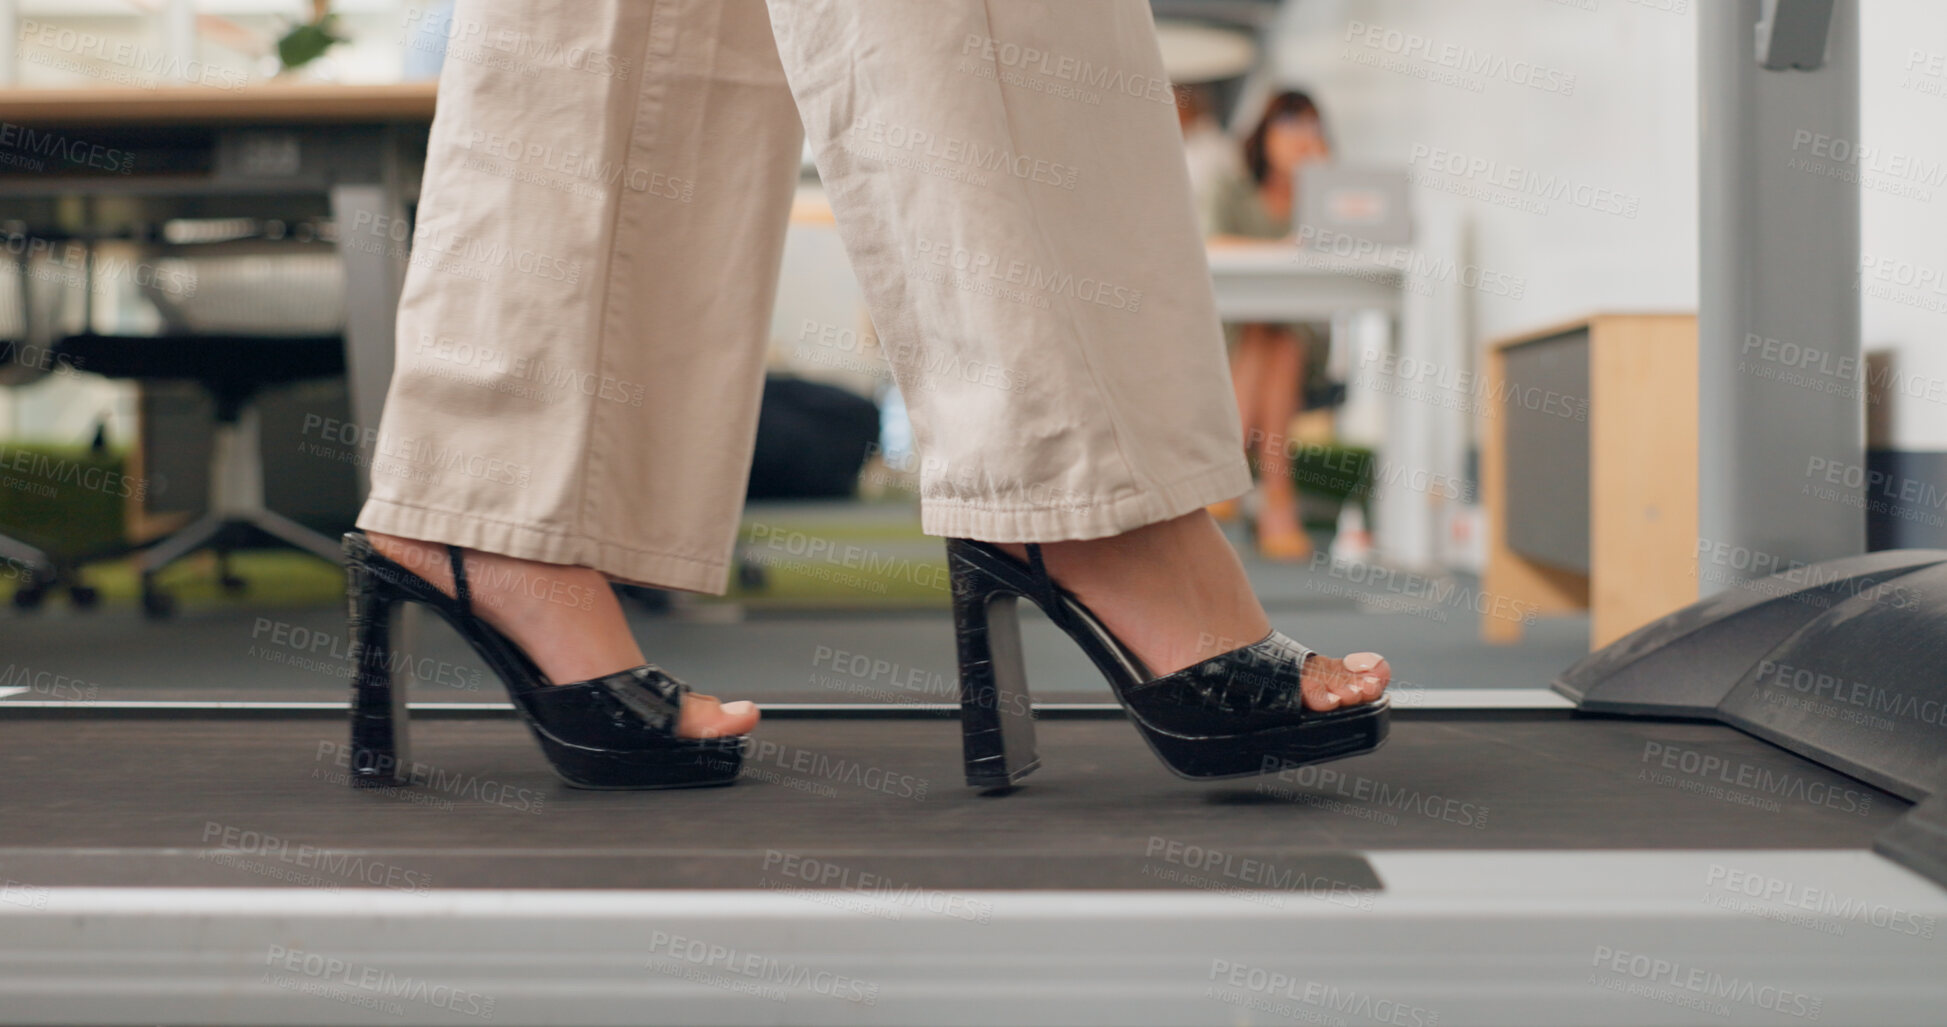 Buy stock photo High heels, walking and woman on a treadmill in business, office and exercise in workplace for fitness, health or cardio. Corporate, employee and professional shoes, feet and moving or calm workout